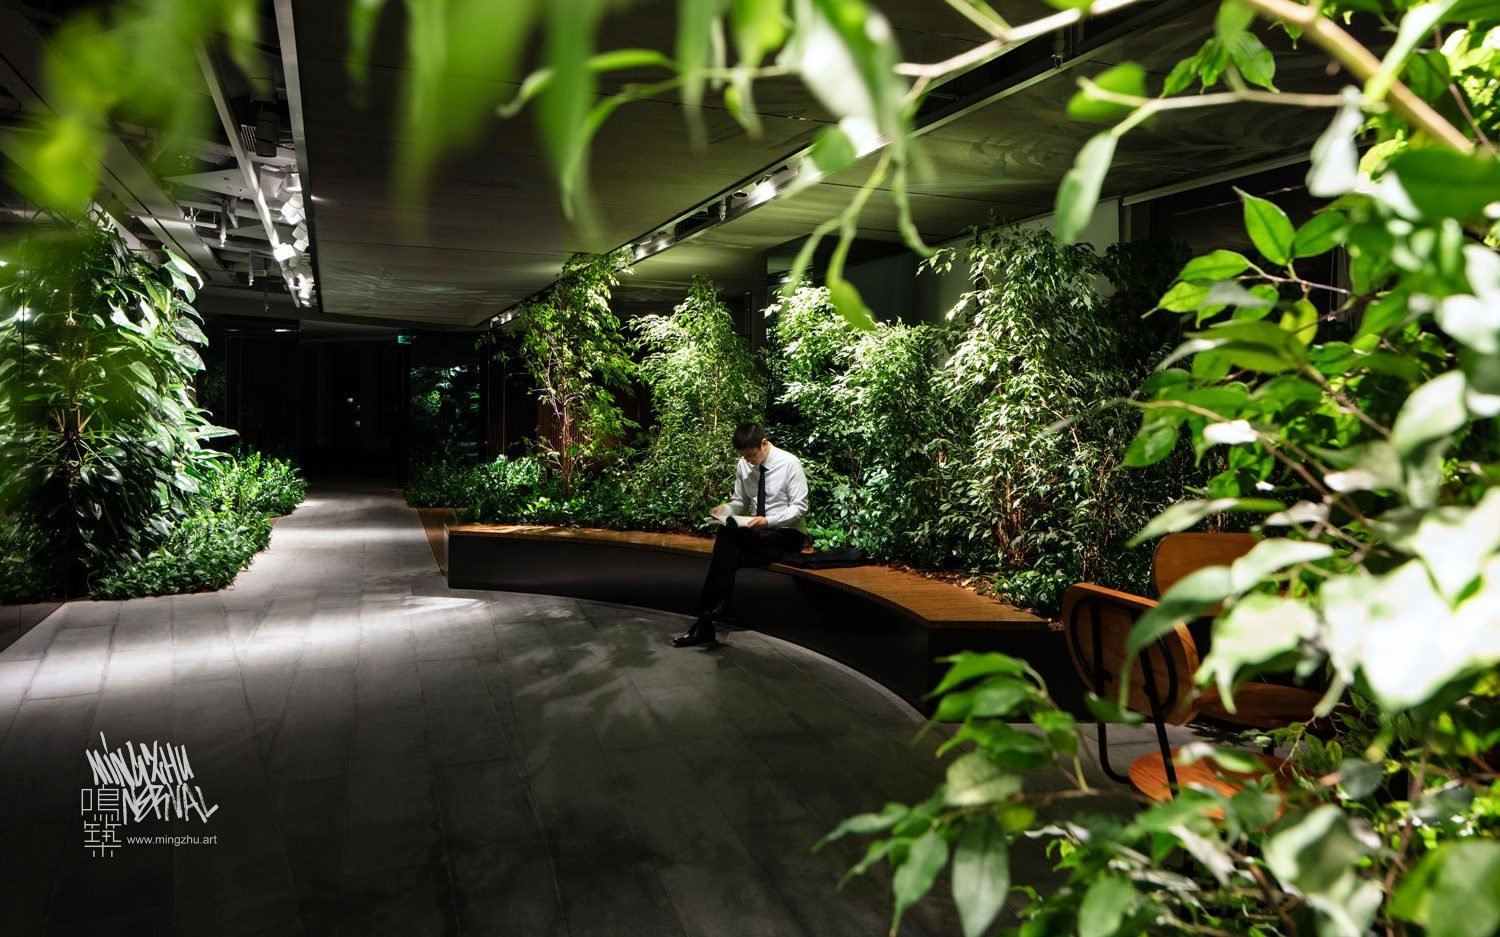 At Mingzhu Nerval, we thrive at creating the most beautiful vertical gardens in the world. For Hines, we created a pleasant living wall design – Shanghai, 2016.